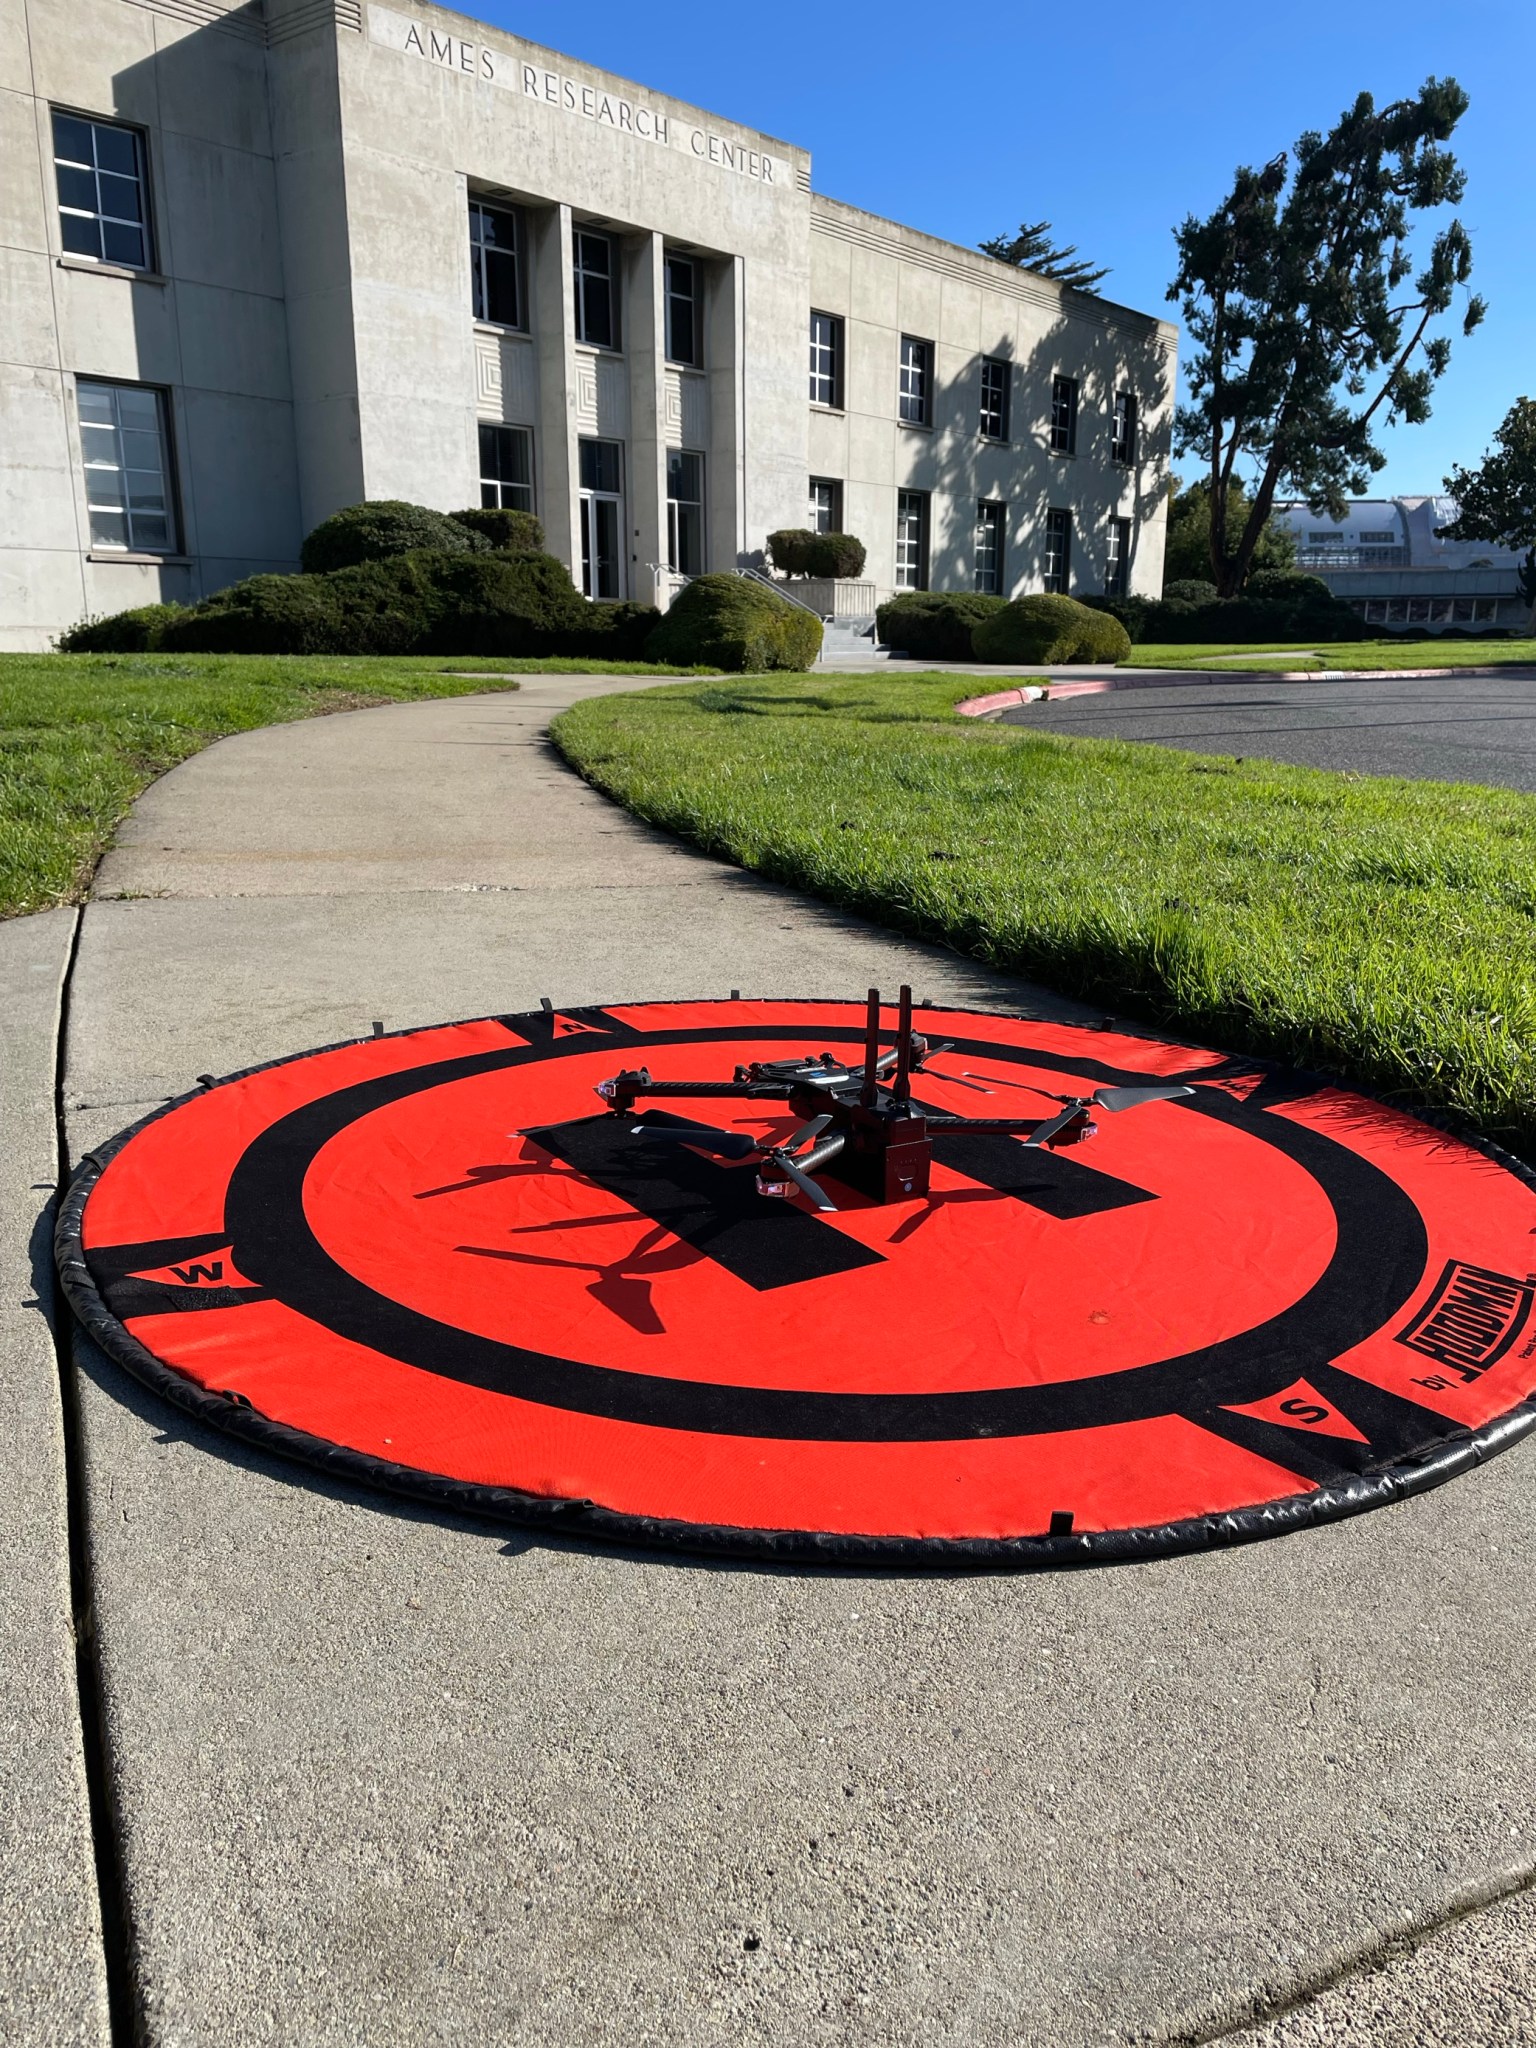 Four rotor drone on orange landing pad in front of building at Ames Research Center.